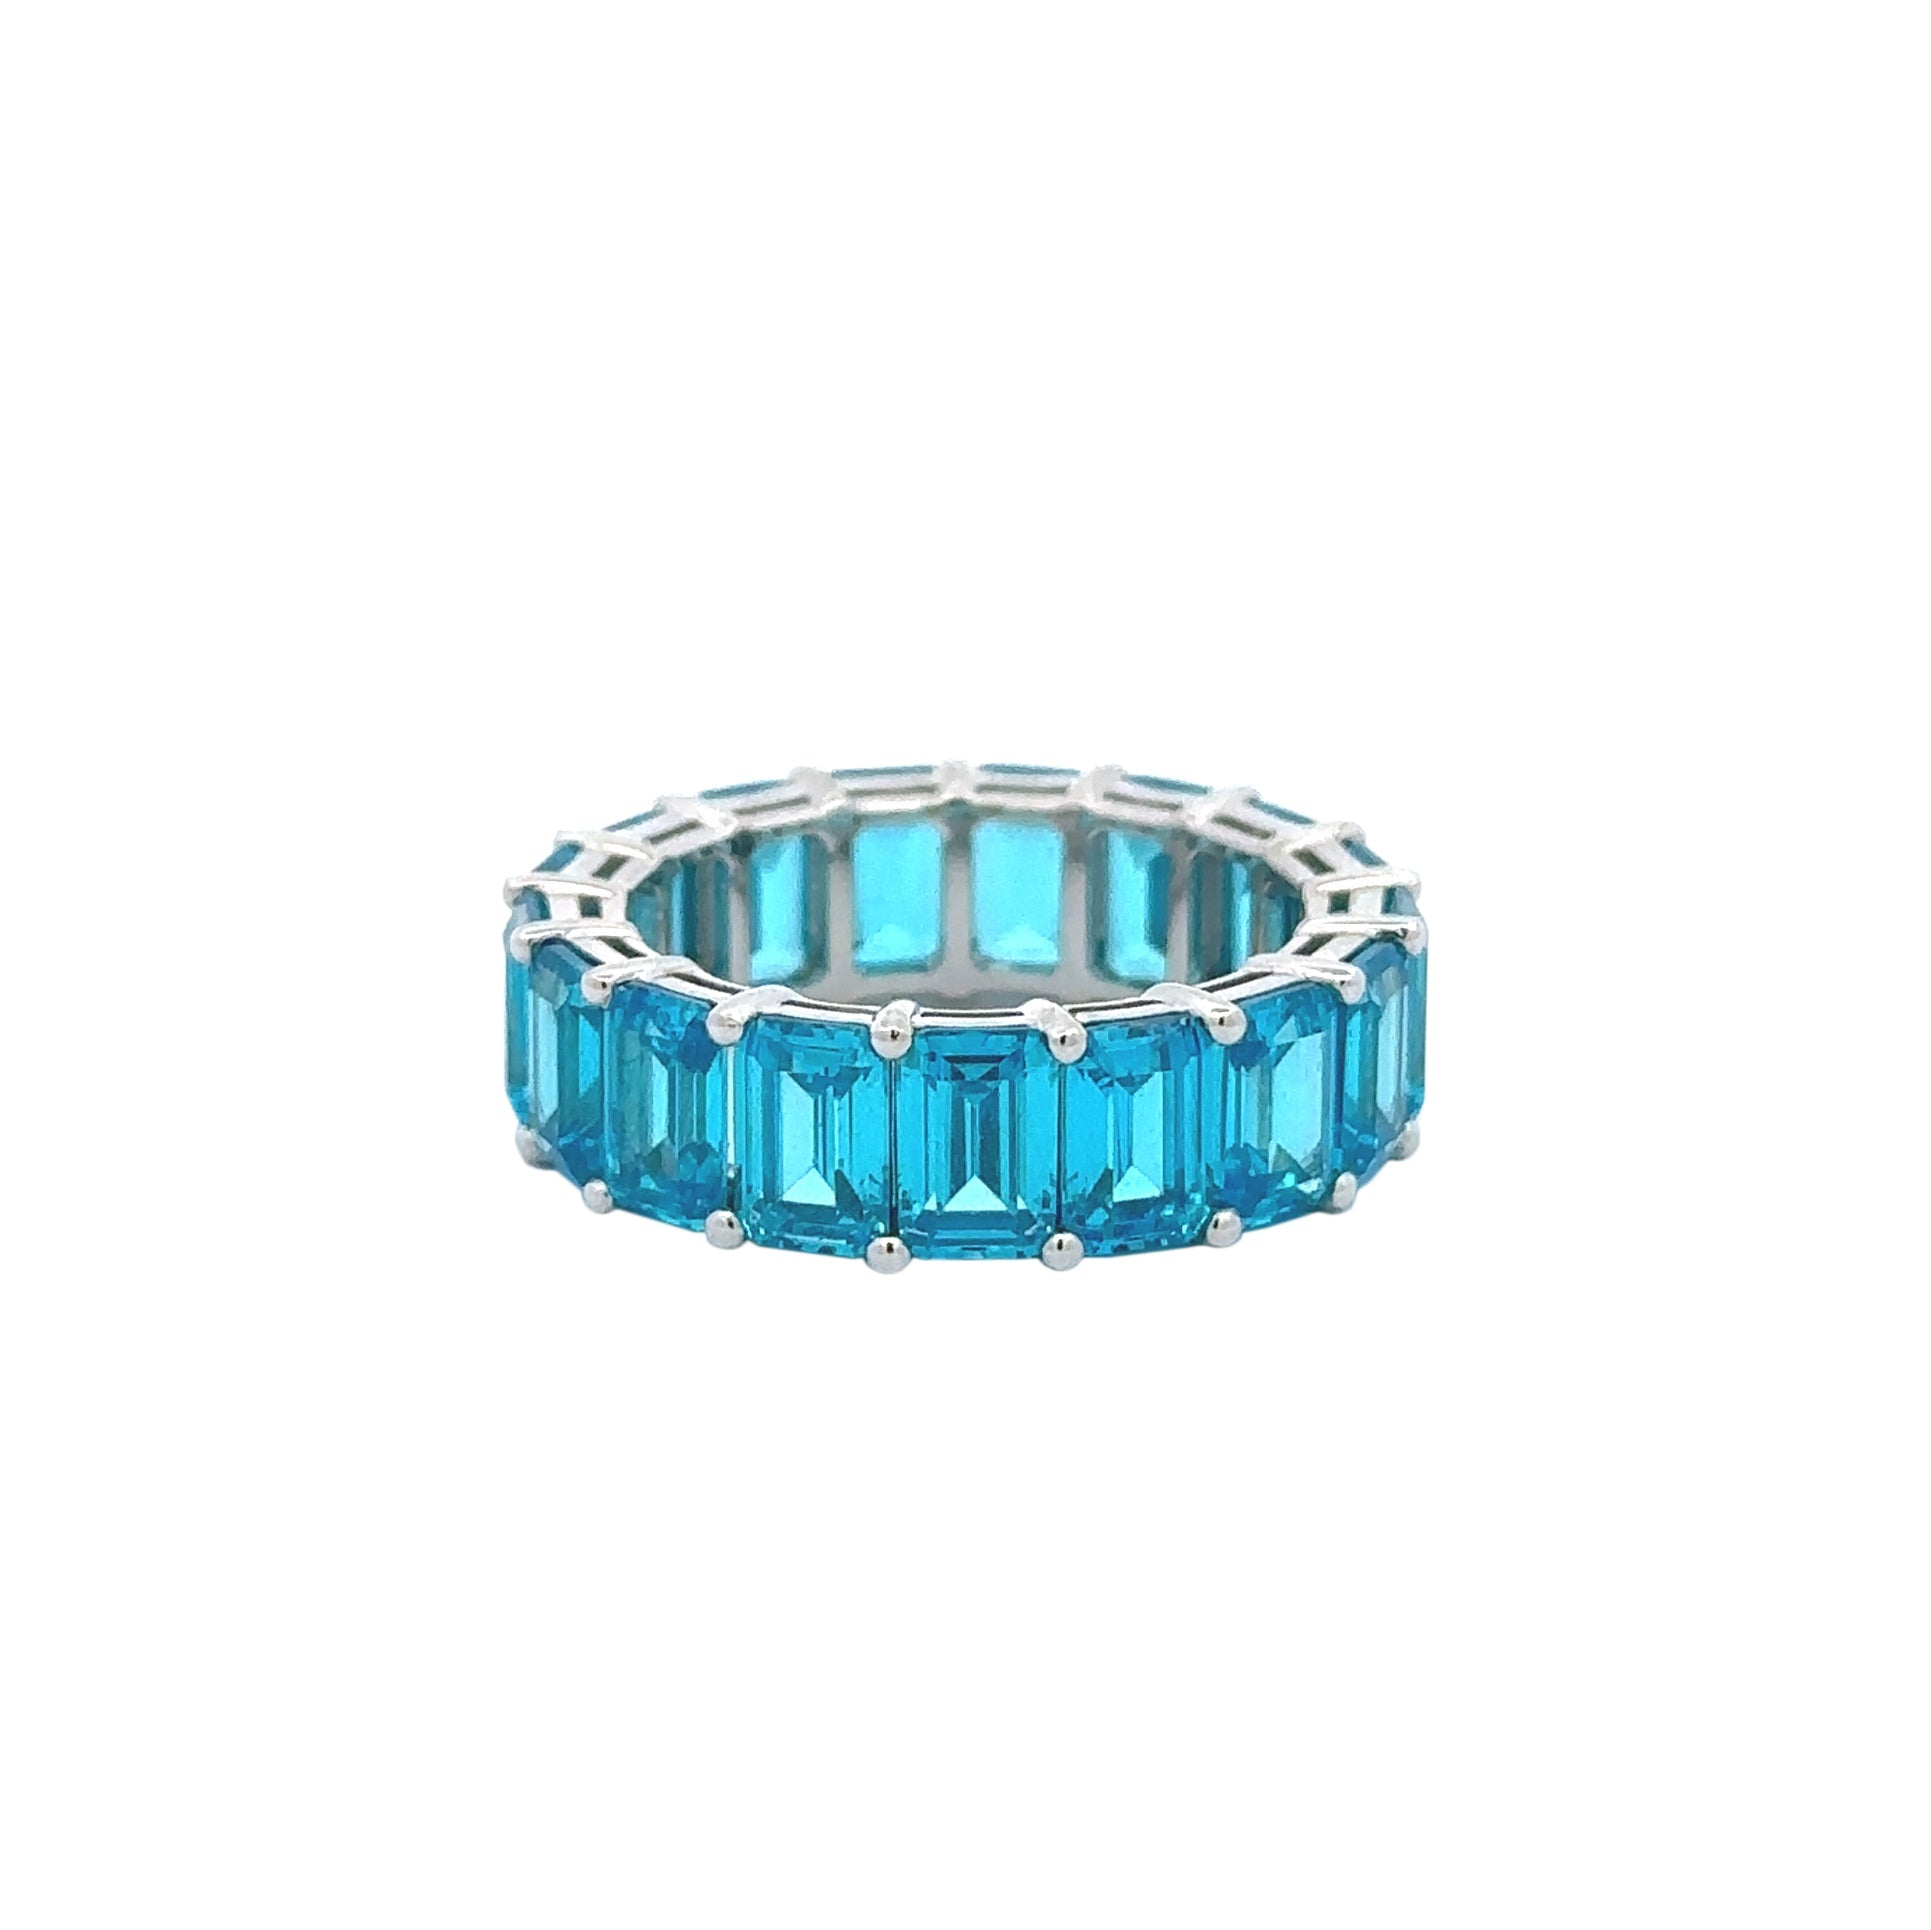 Gemma Couture Blue Topaz Eternity Band - Be On Park